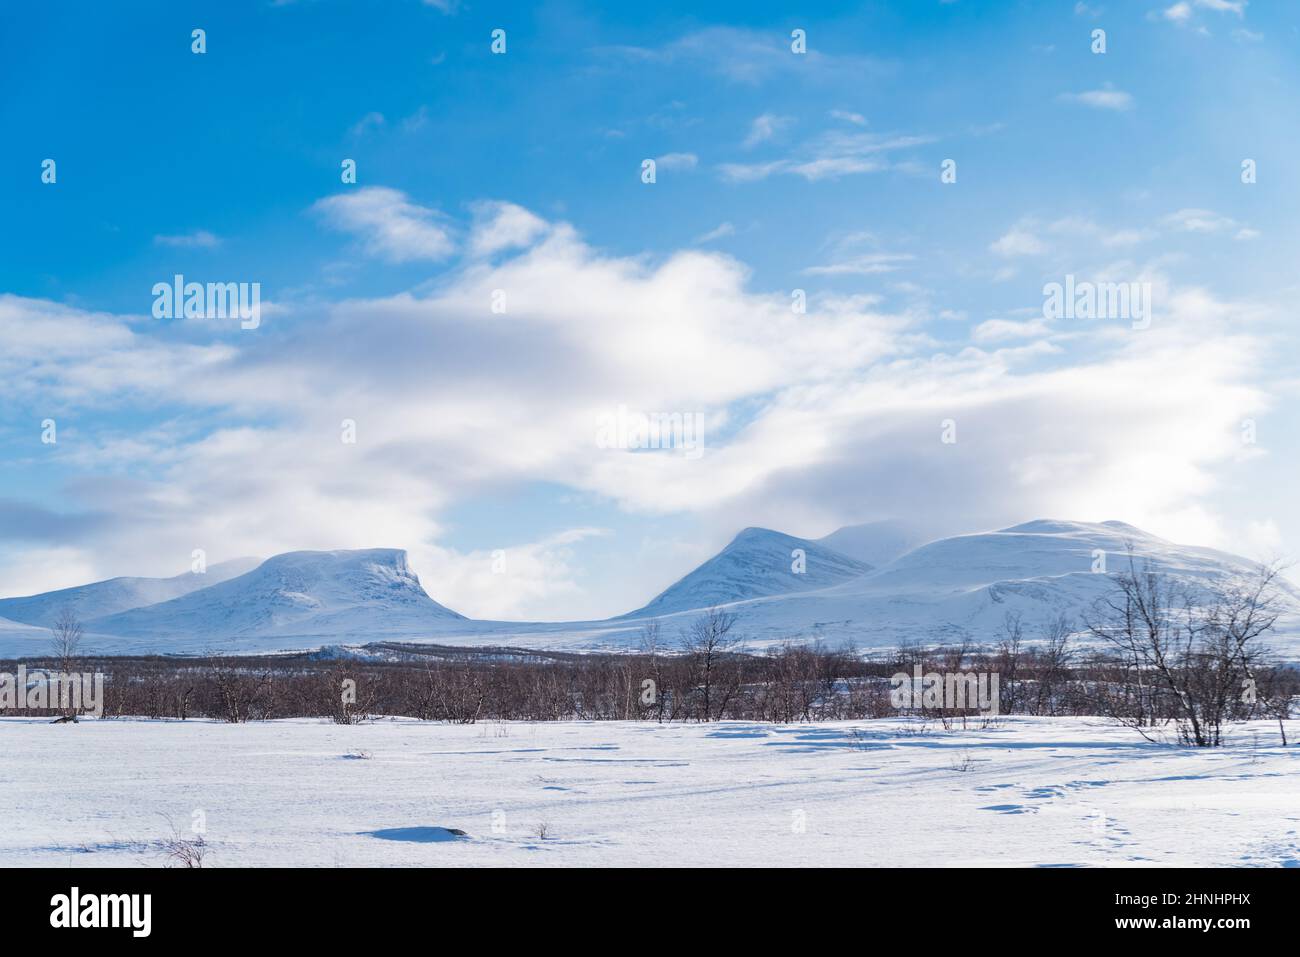 Lapporten or Tjuonavagge is a U-shaped valley in Lapland in northern Sweden, one of the most familiar natural sights of the mountains there. Stock Photo